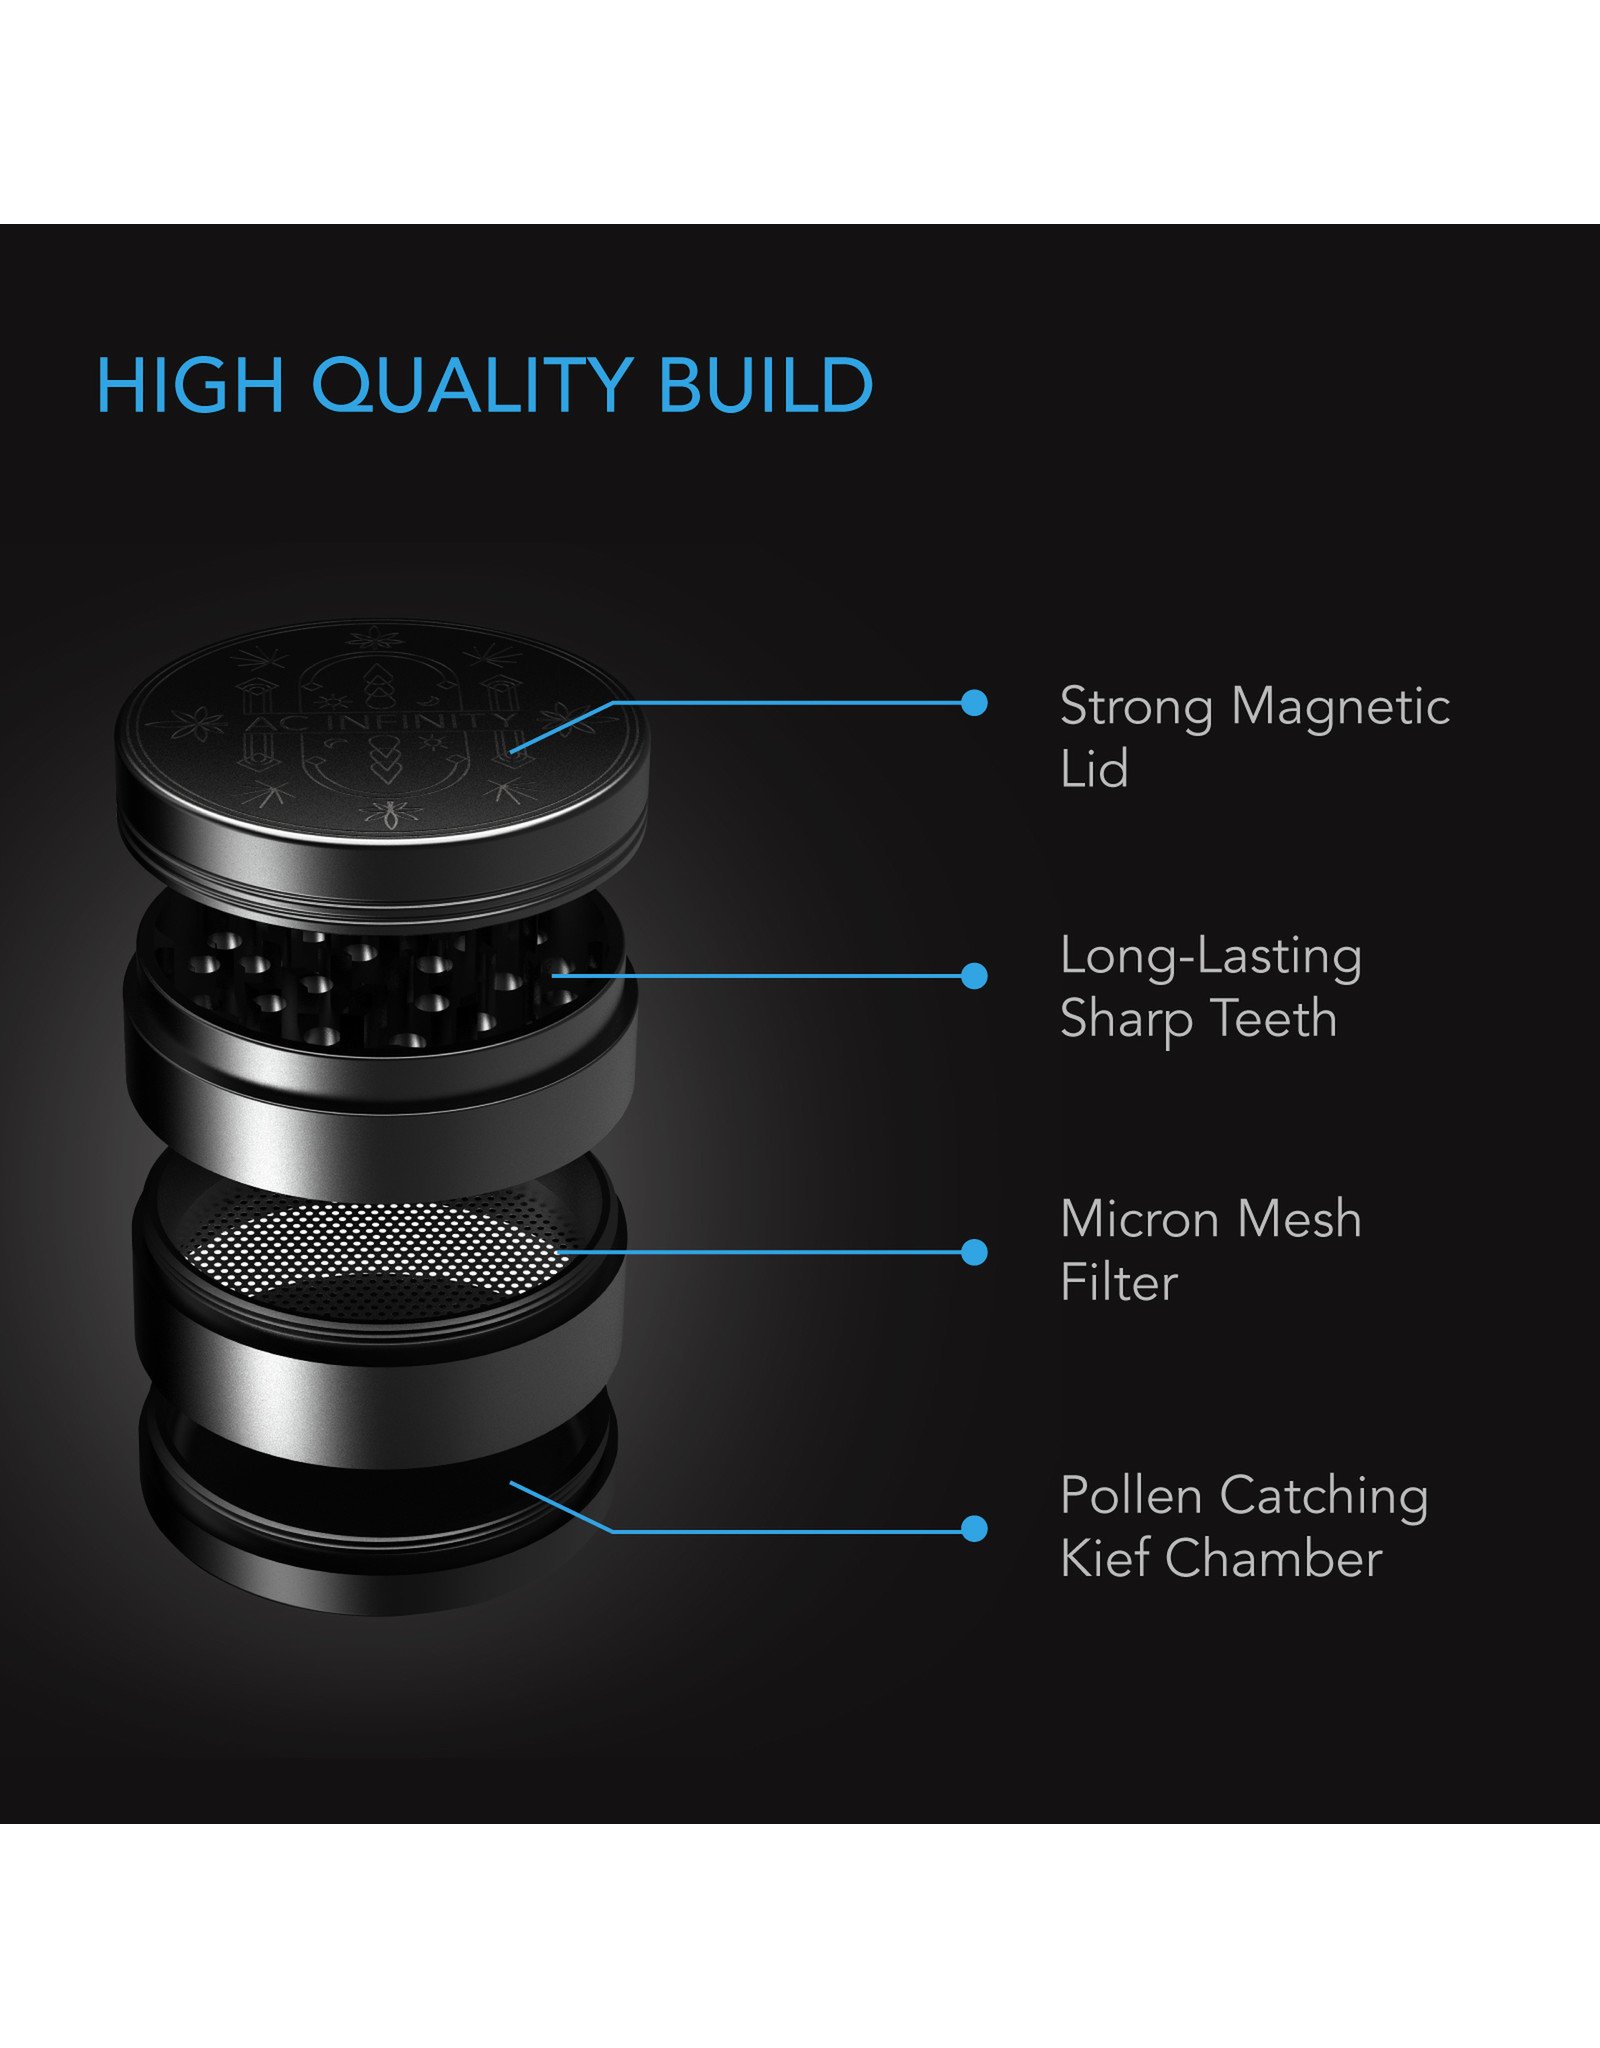 AC Infinity Magnetic 3-Chamber Herb Grinder Black - 2.5 INCH